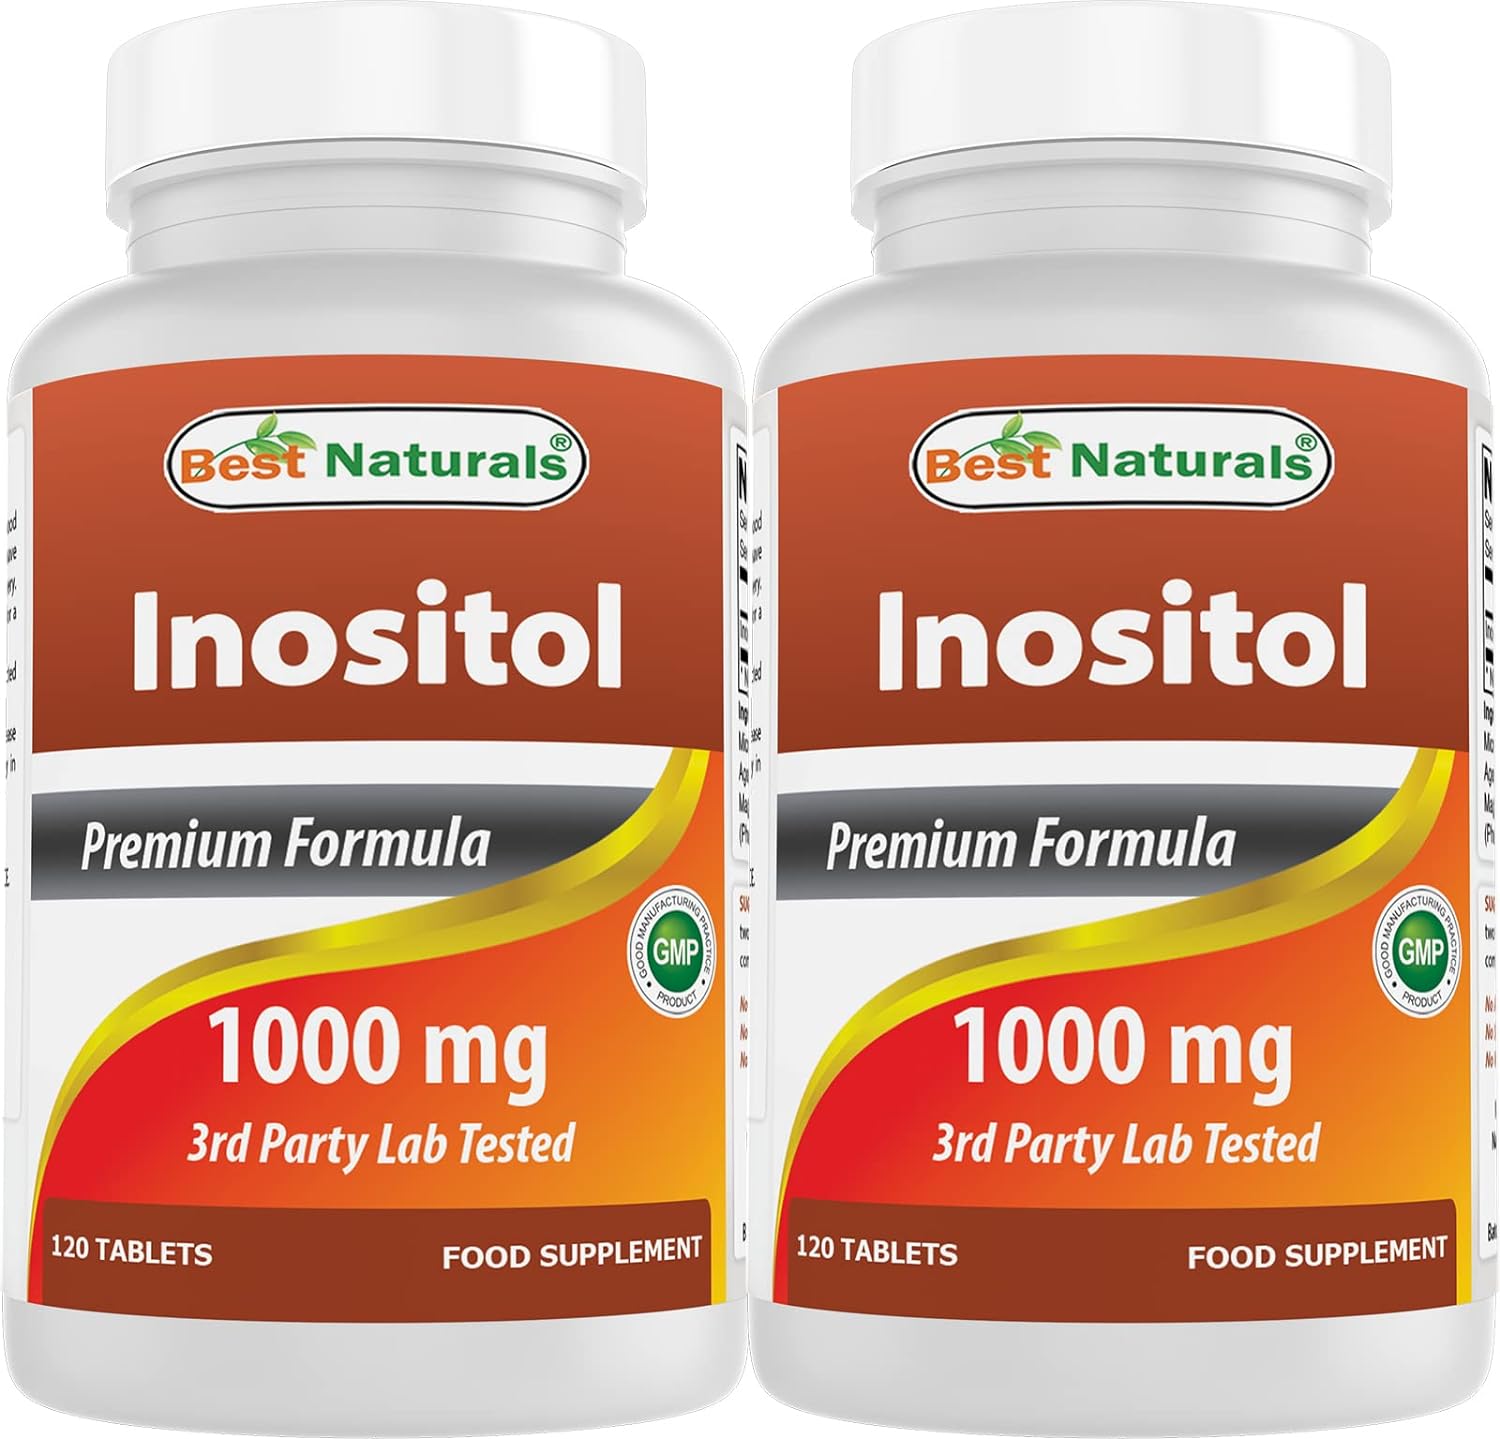 Best Naturals Inositol 1000 mg 120 Tablets (120 Count (Pack of 1)) (120 Count (Pack of 2))